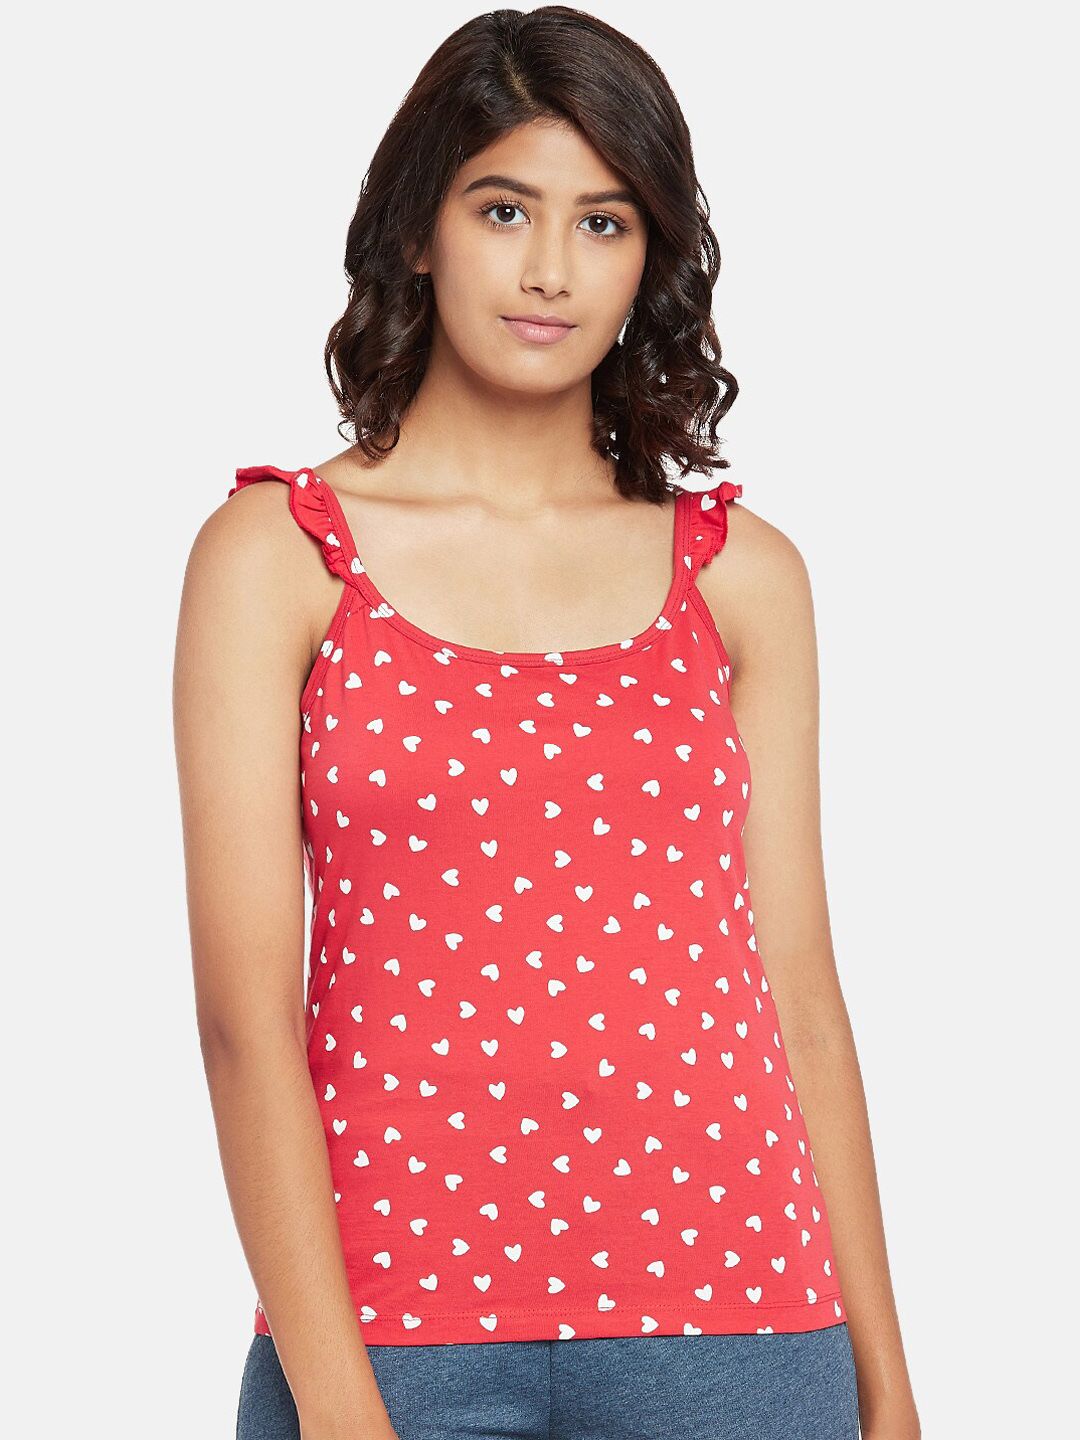 Dreamz by Pantaloons Red Printed Pure Cotton Regular Lounge tshirt Price in India